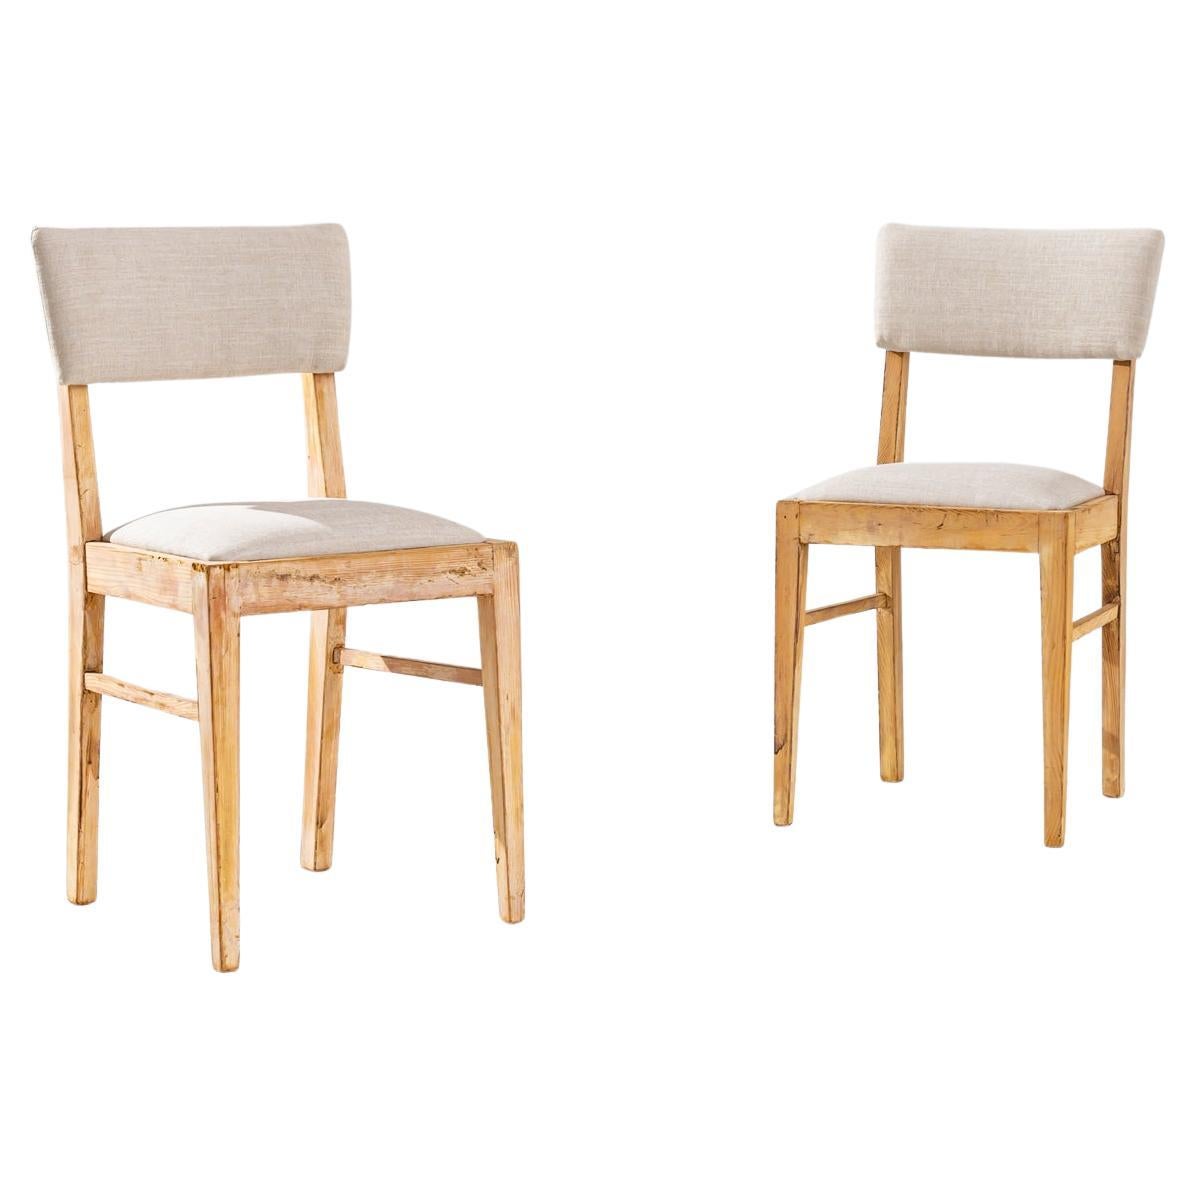 1900s Central European Wooden Chairs with Upholstered Seats and Back, a Pair